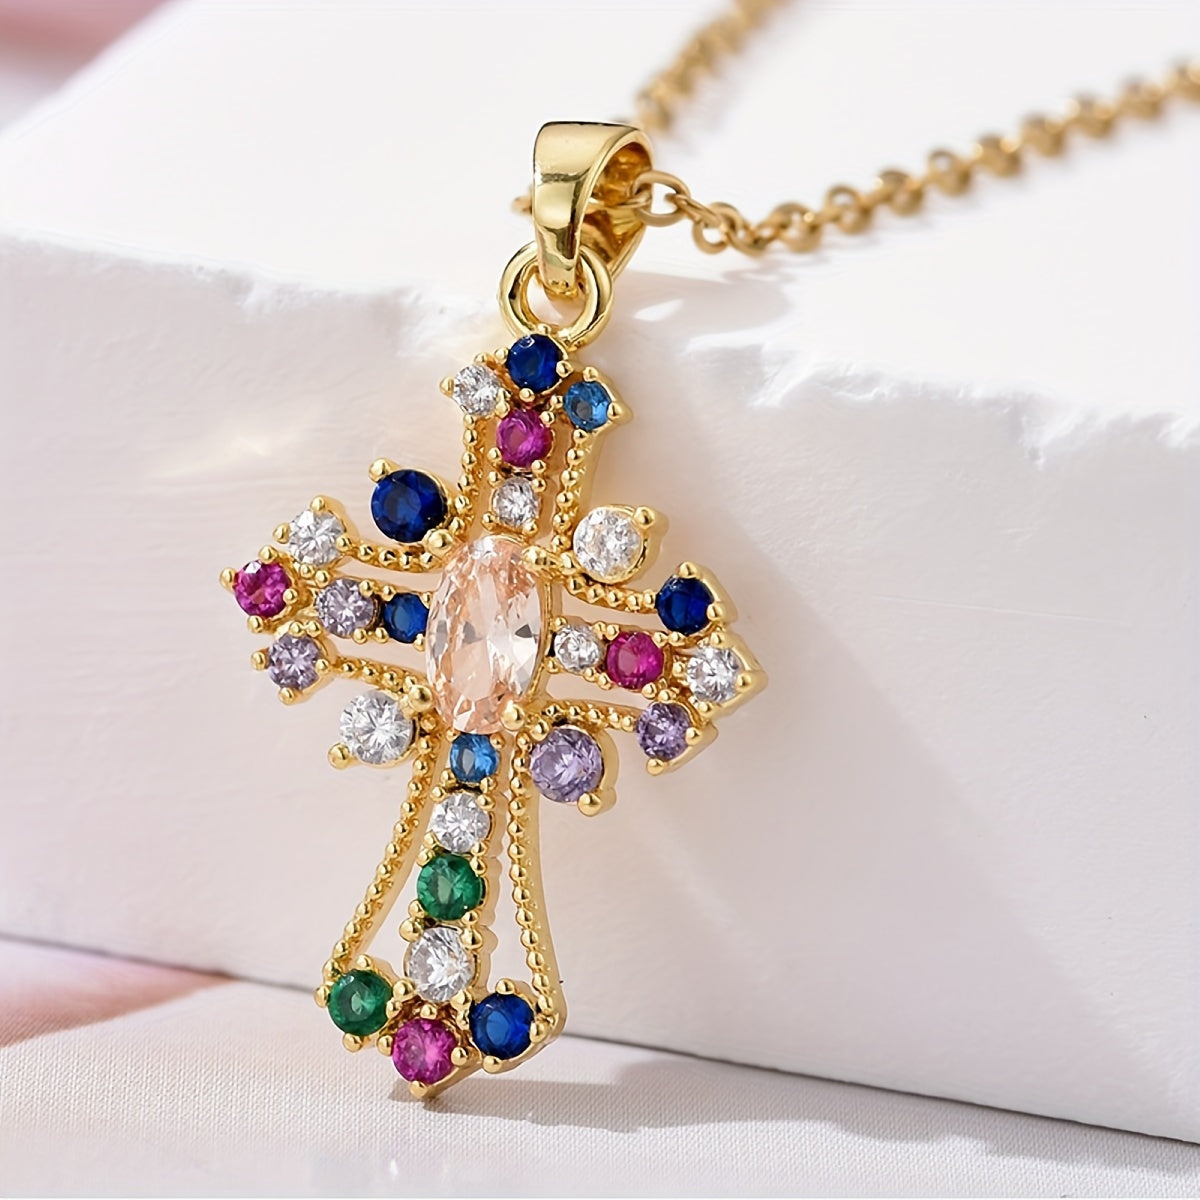 Creative Fashionable Cross Necklace, Girl's Retro Party Accessories